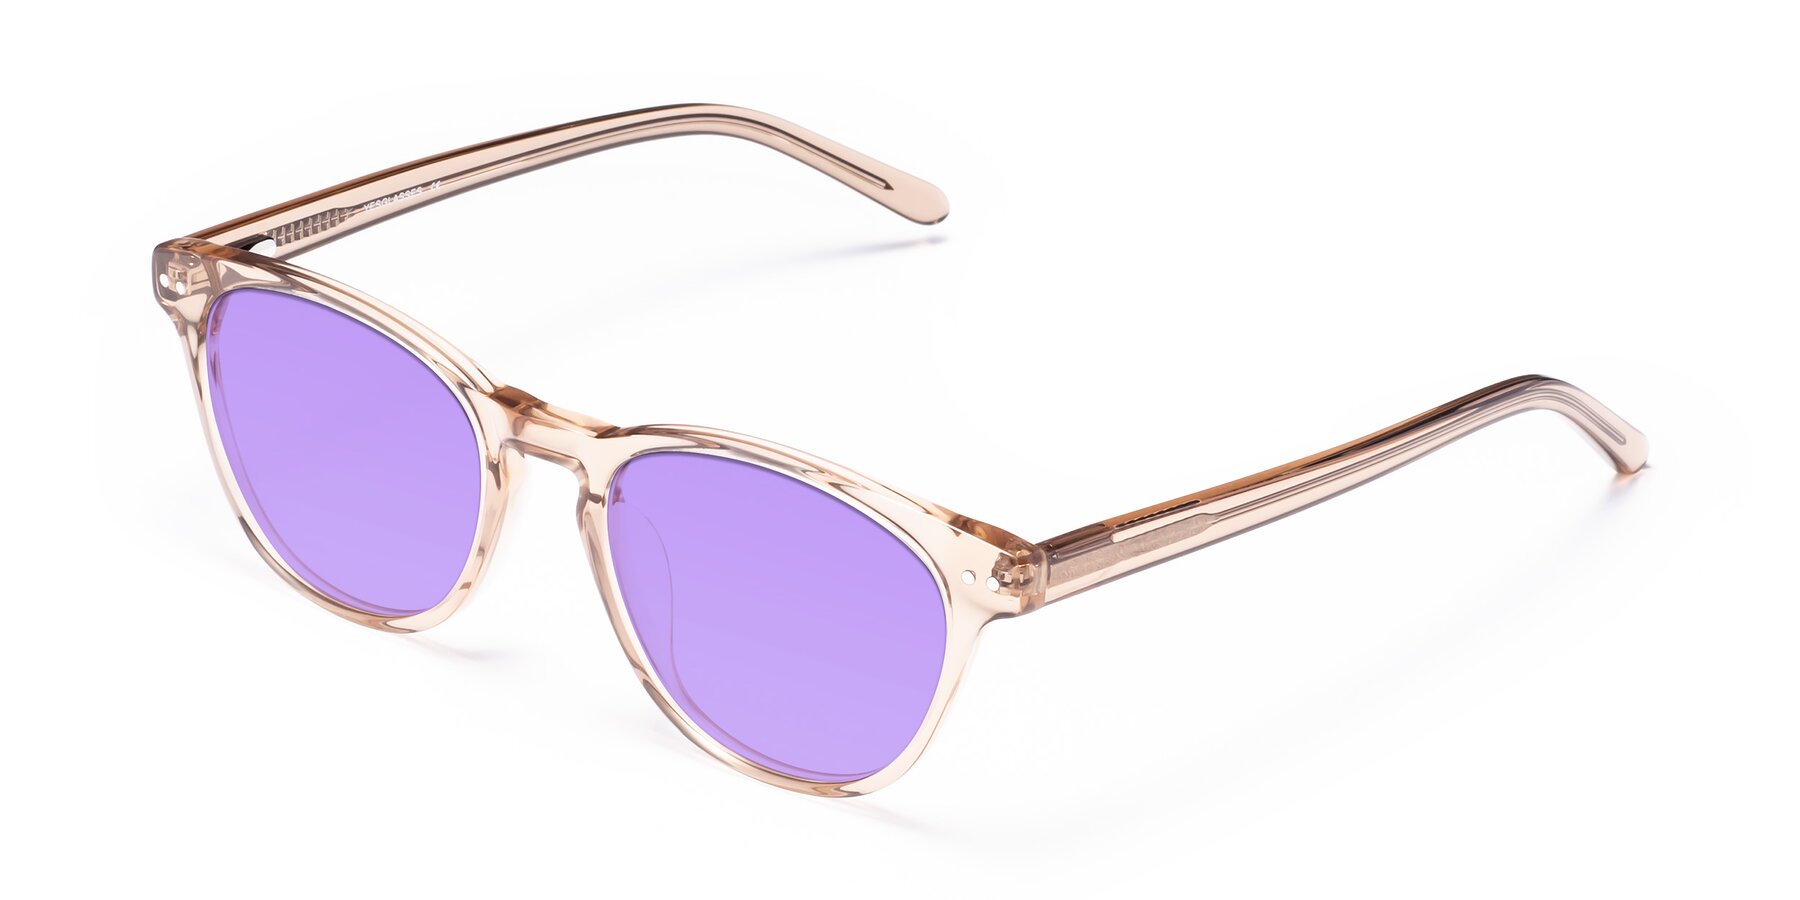 Angle of Blaze in light Brown with Medium Purple Tinted Lenses